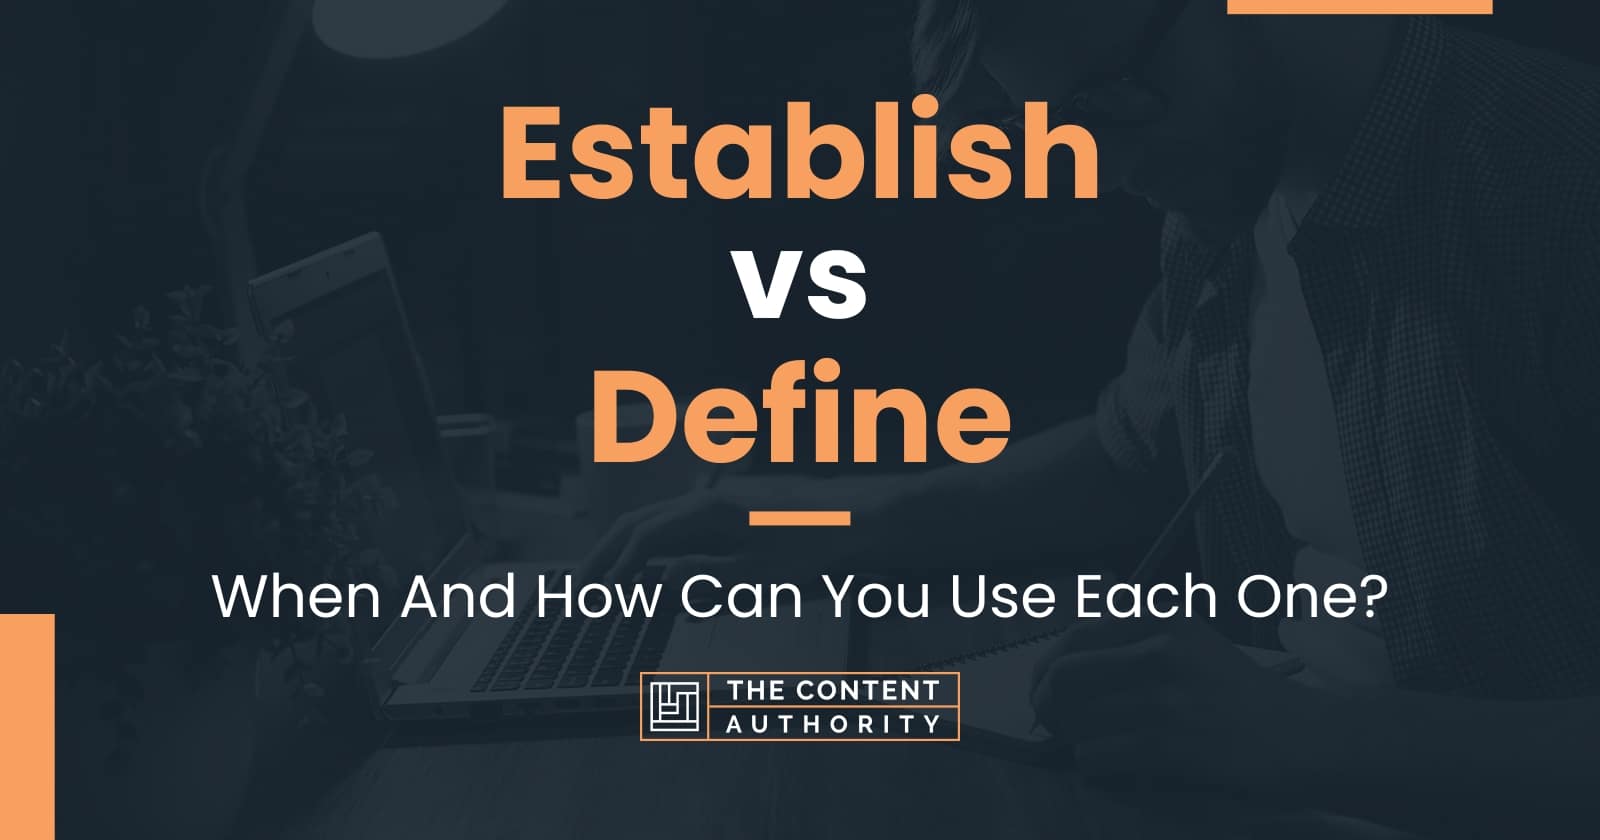 Establish vs Define: When And How Can You Use Each One?